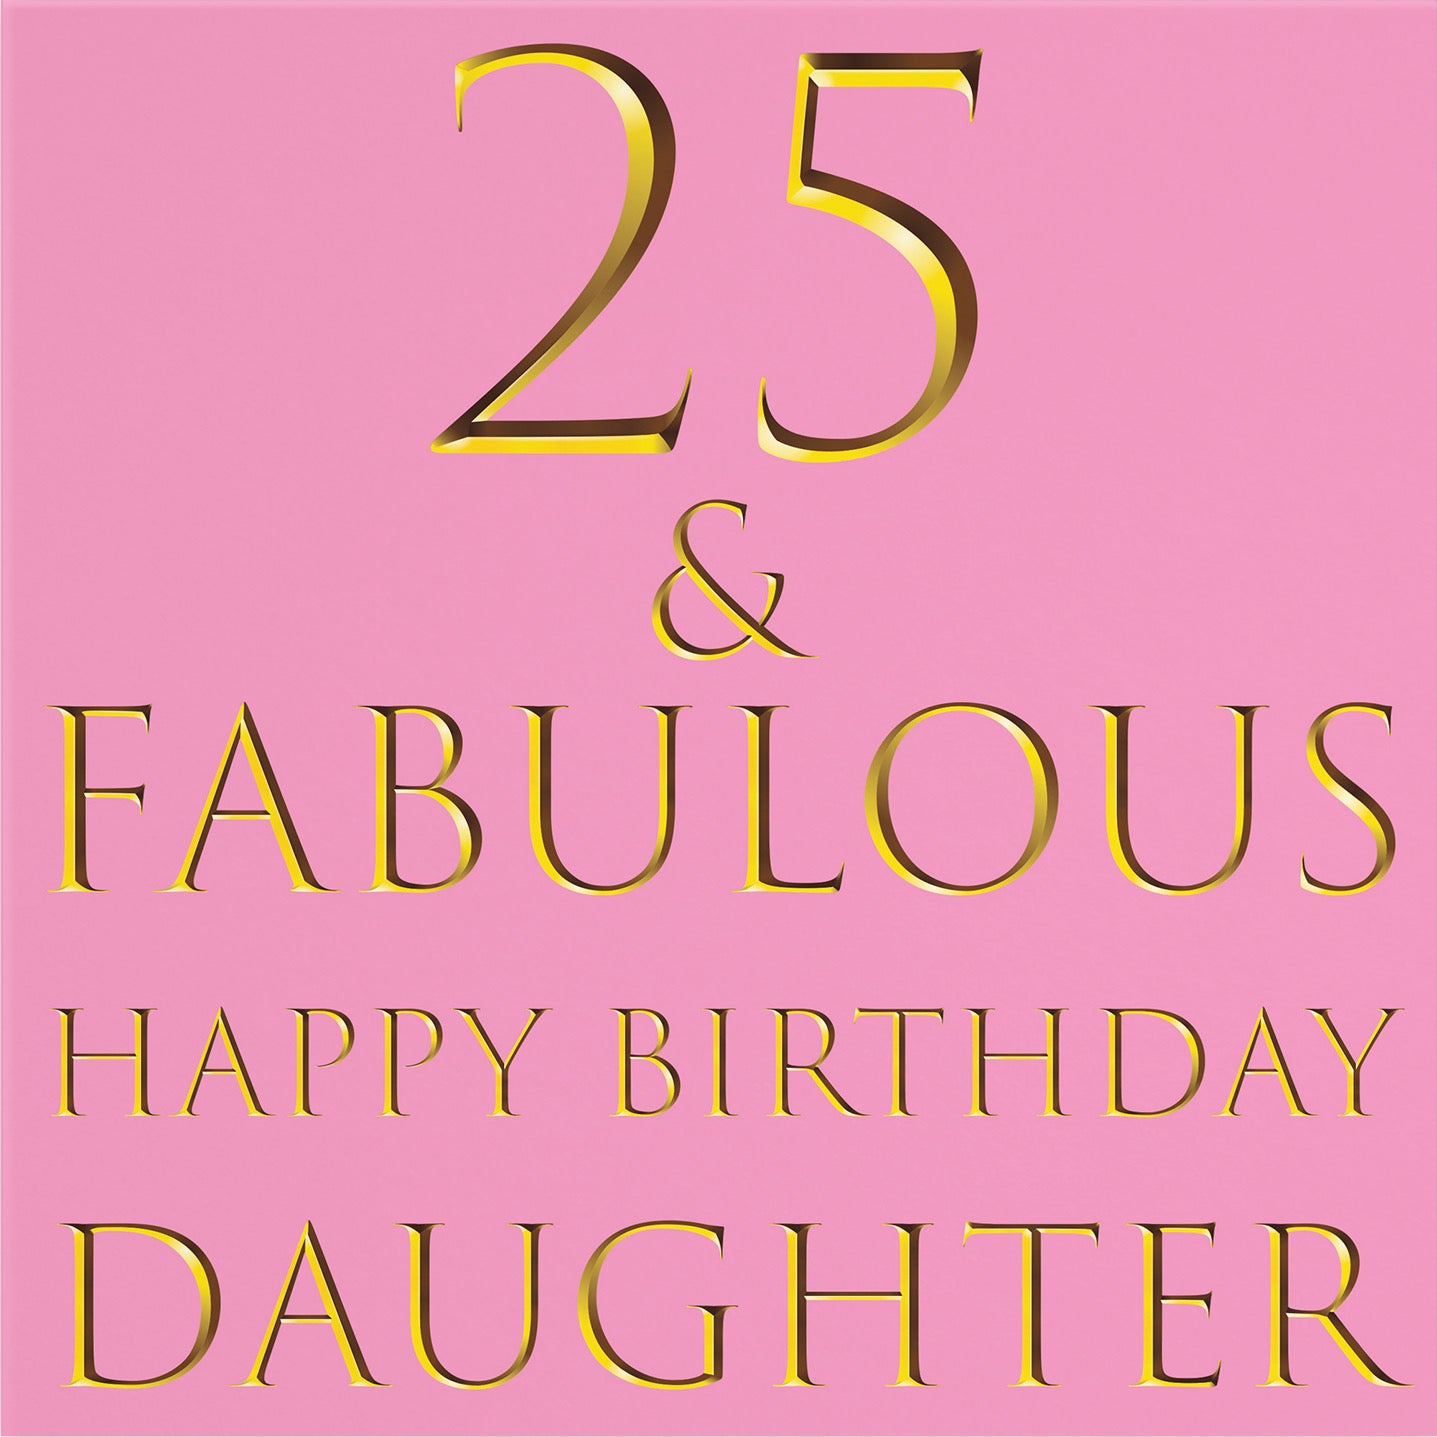 Large Daughter 25th Birthday Card Still Totally Fabulous - Default Title (B0BBMWPYNW)